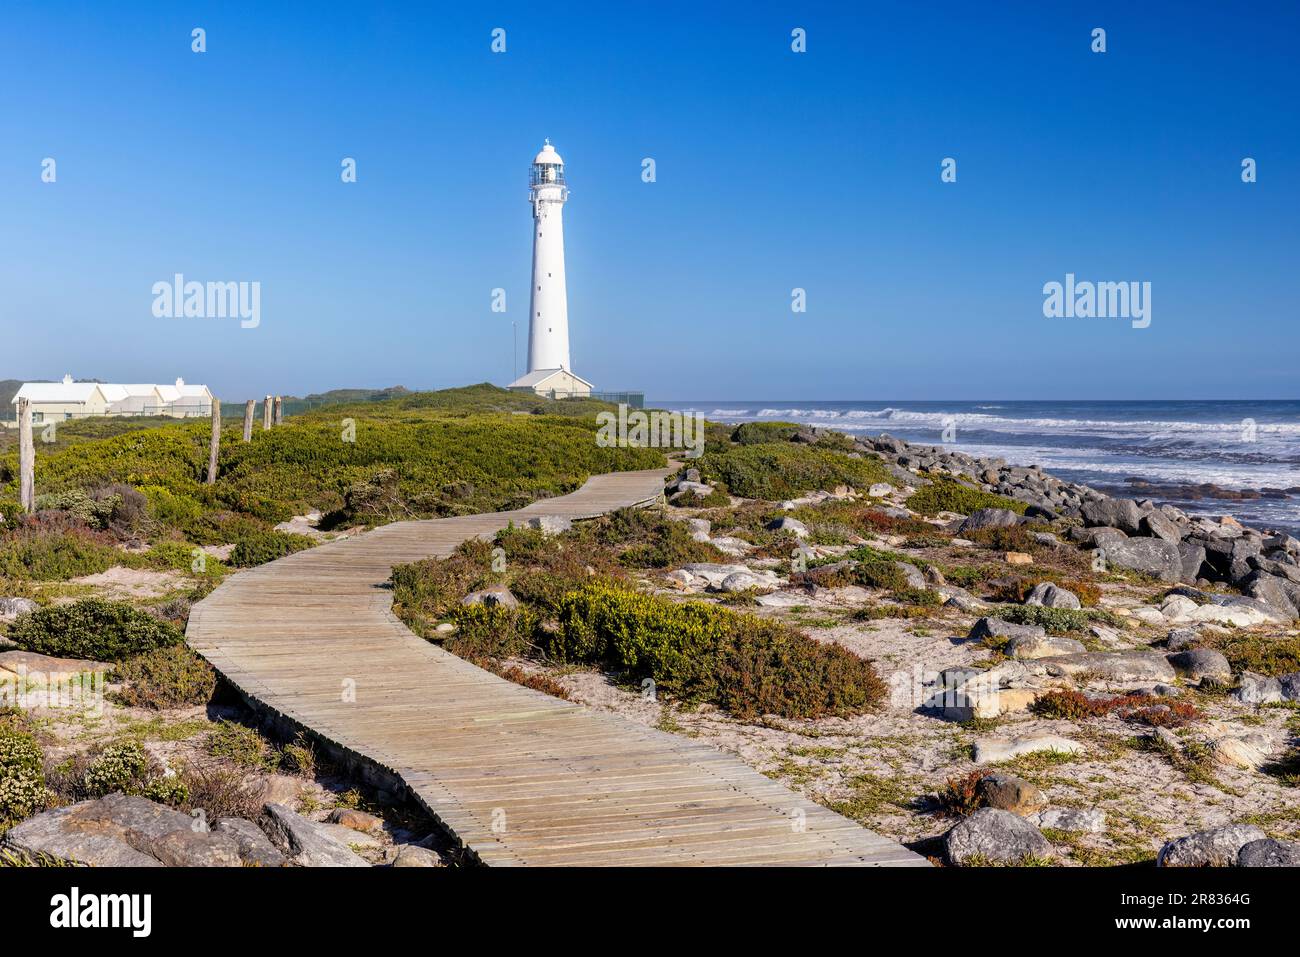 Slangkop Lighthouse in Kommetjie near Cape Town, South Africa Stock Photo